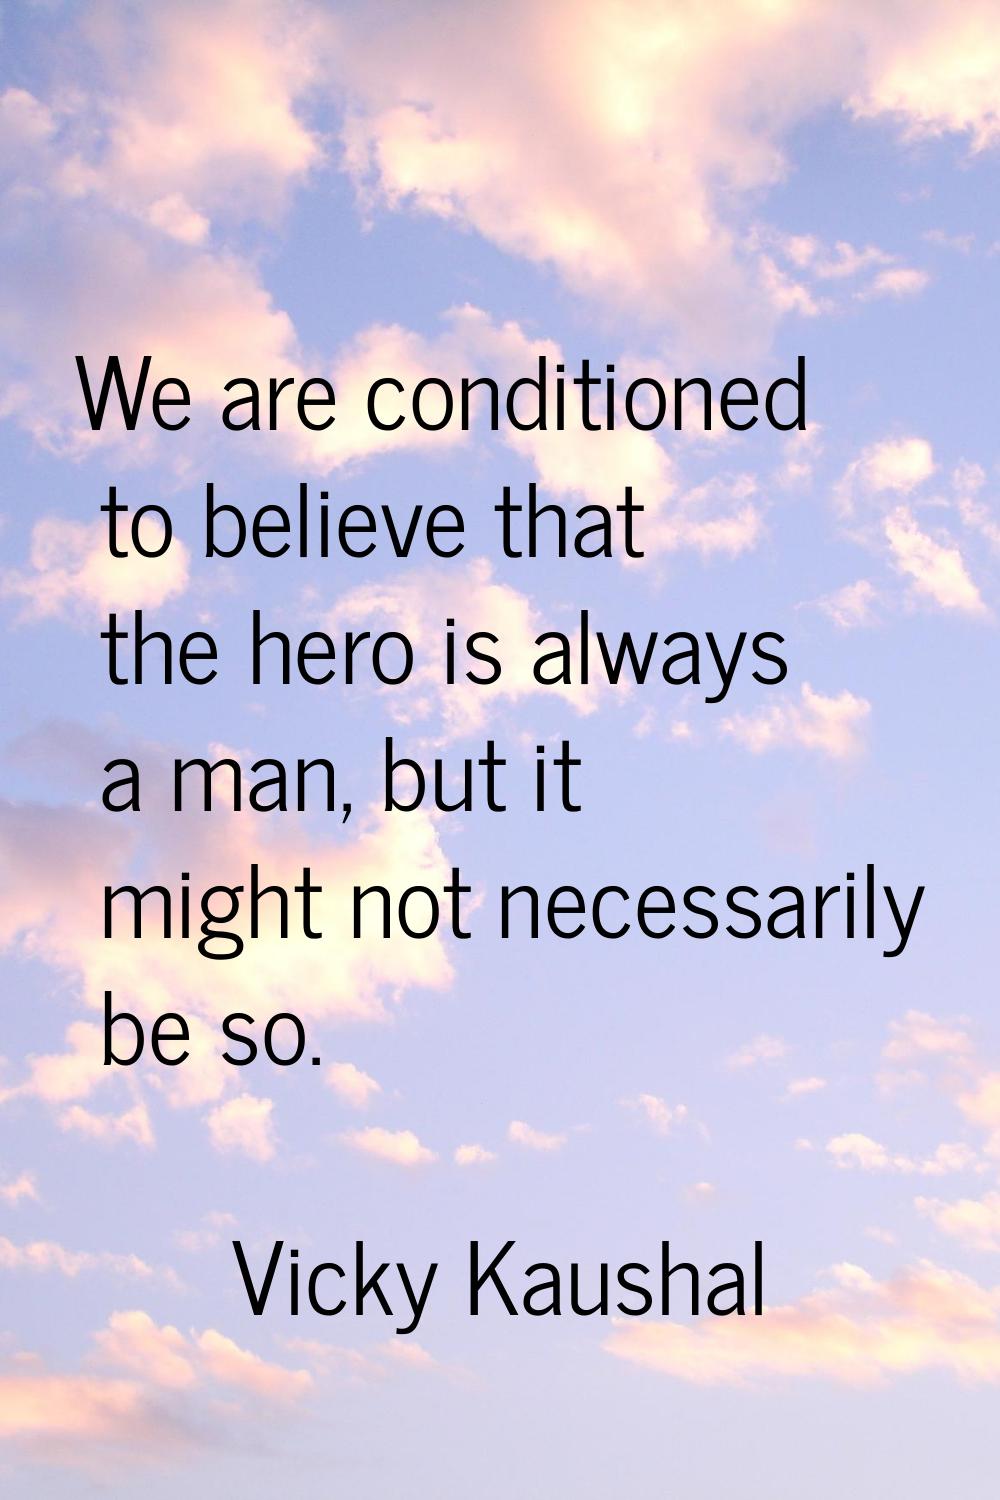 We are conditioned to believe that the hero is always a man, but it might not necessarily be so.